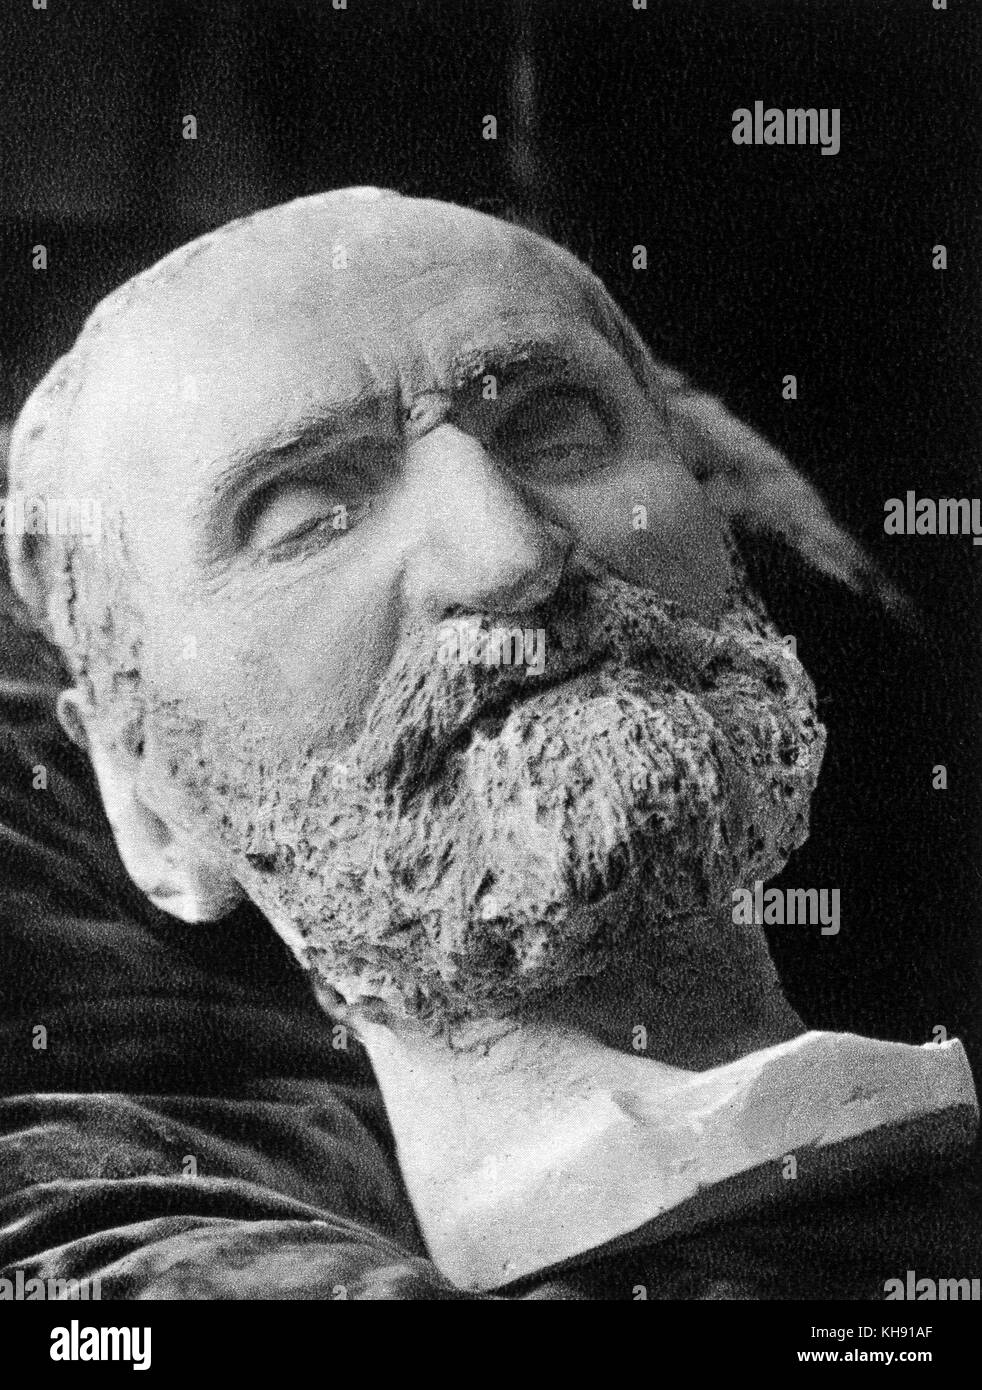 Giuseppe Verdi 's death mask - from sculpture by Emilio Quadrelli. Mask made from gesso.   Italian composer,  9 or 10 October 1813 - 27 January 1901. Stock Photo